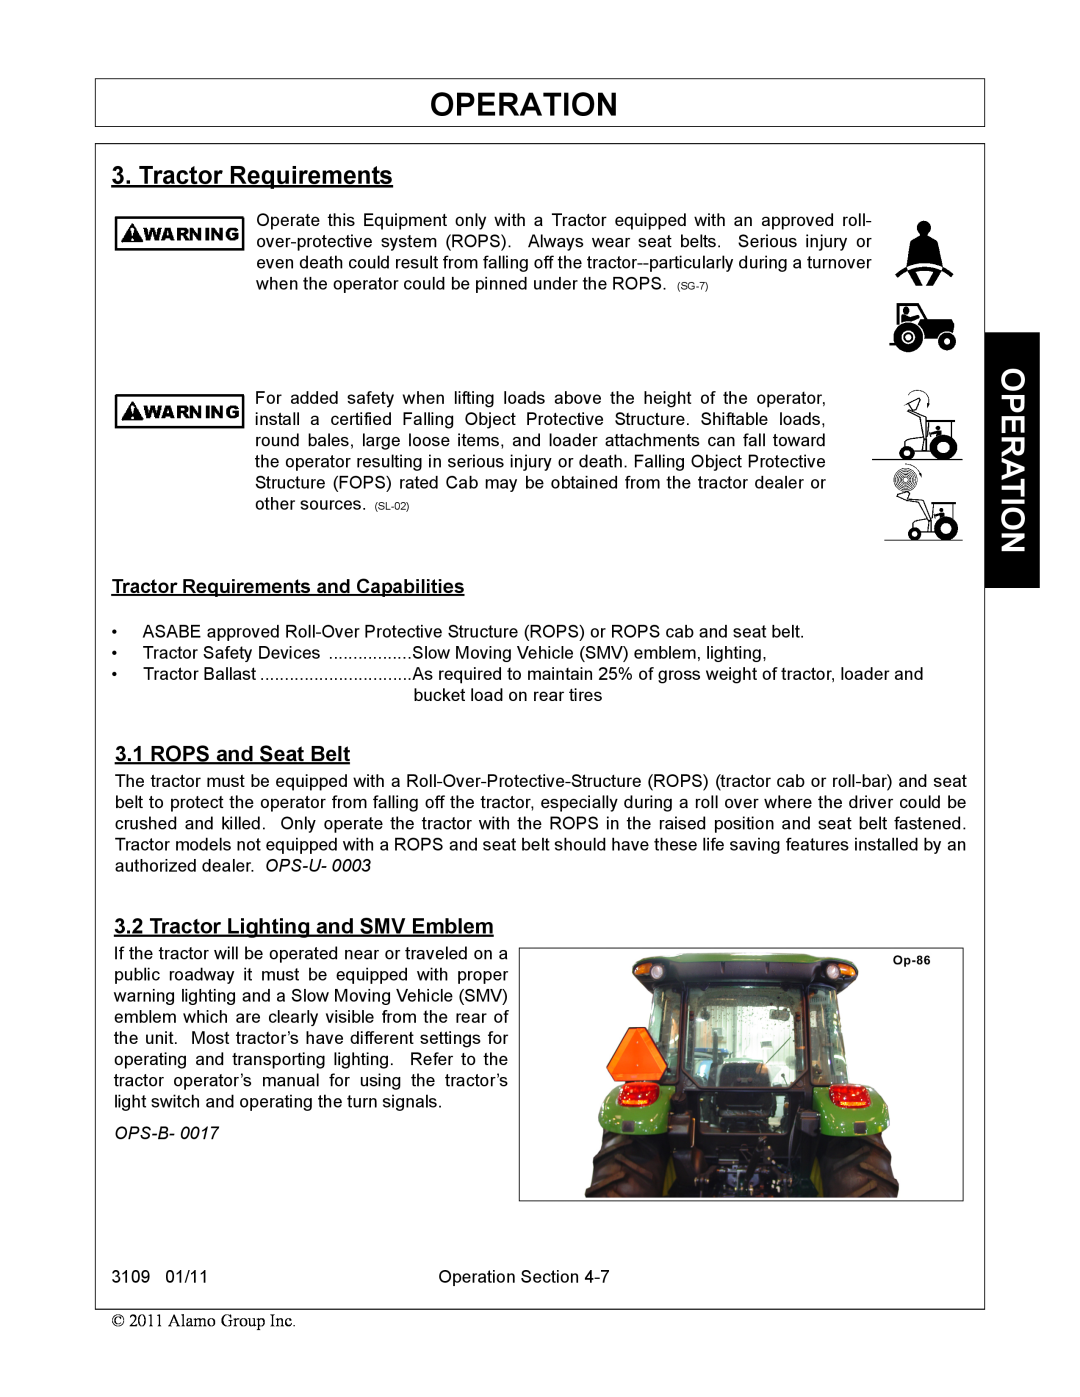 Alamo 3109 manual Operation, Tractor Requirements, 3.1ROPS and Seat Belt, Tractor Lighting and SMV Emblem, OPS-B-0017 